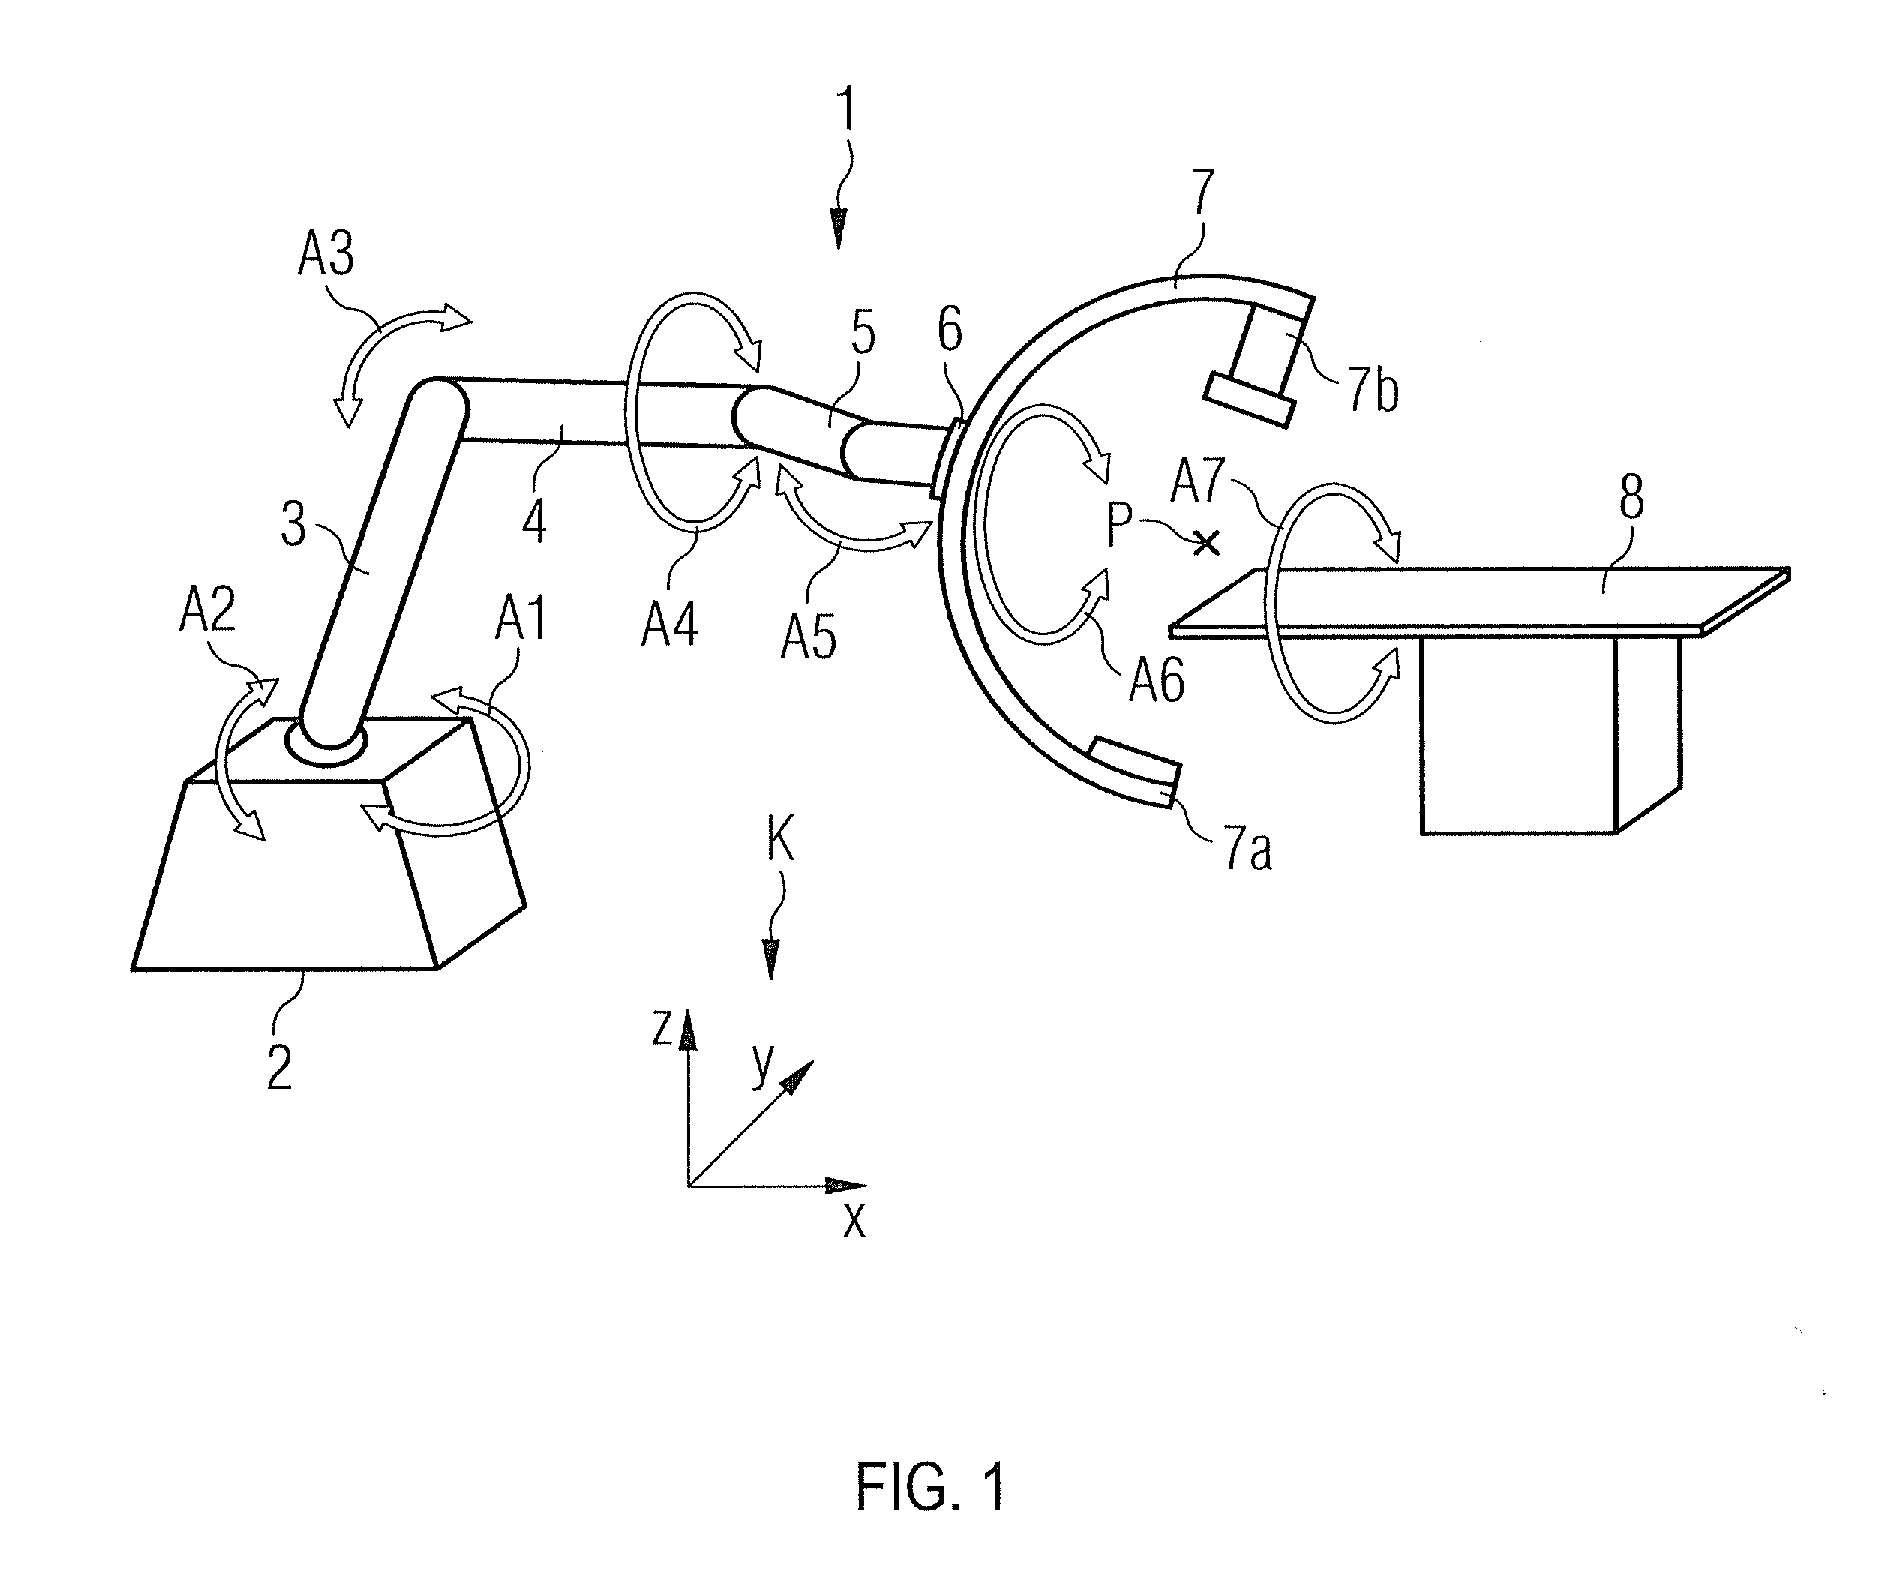 Method for computer-aided movement planning of a robot